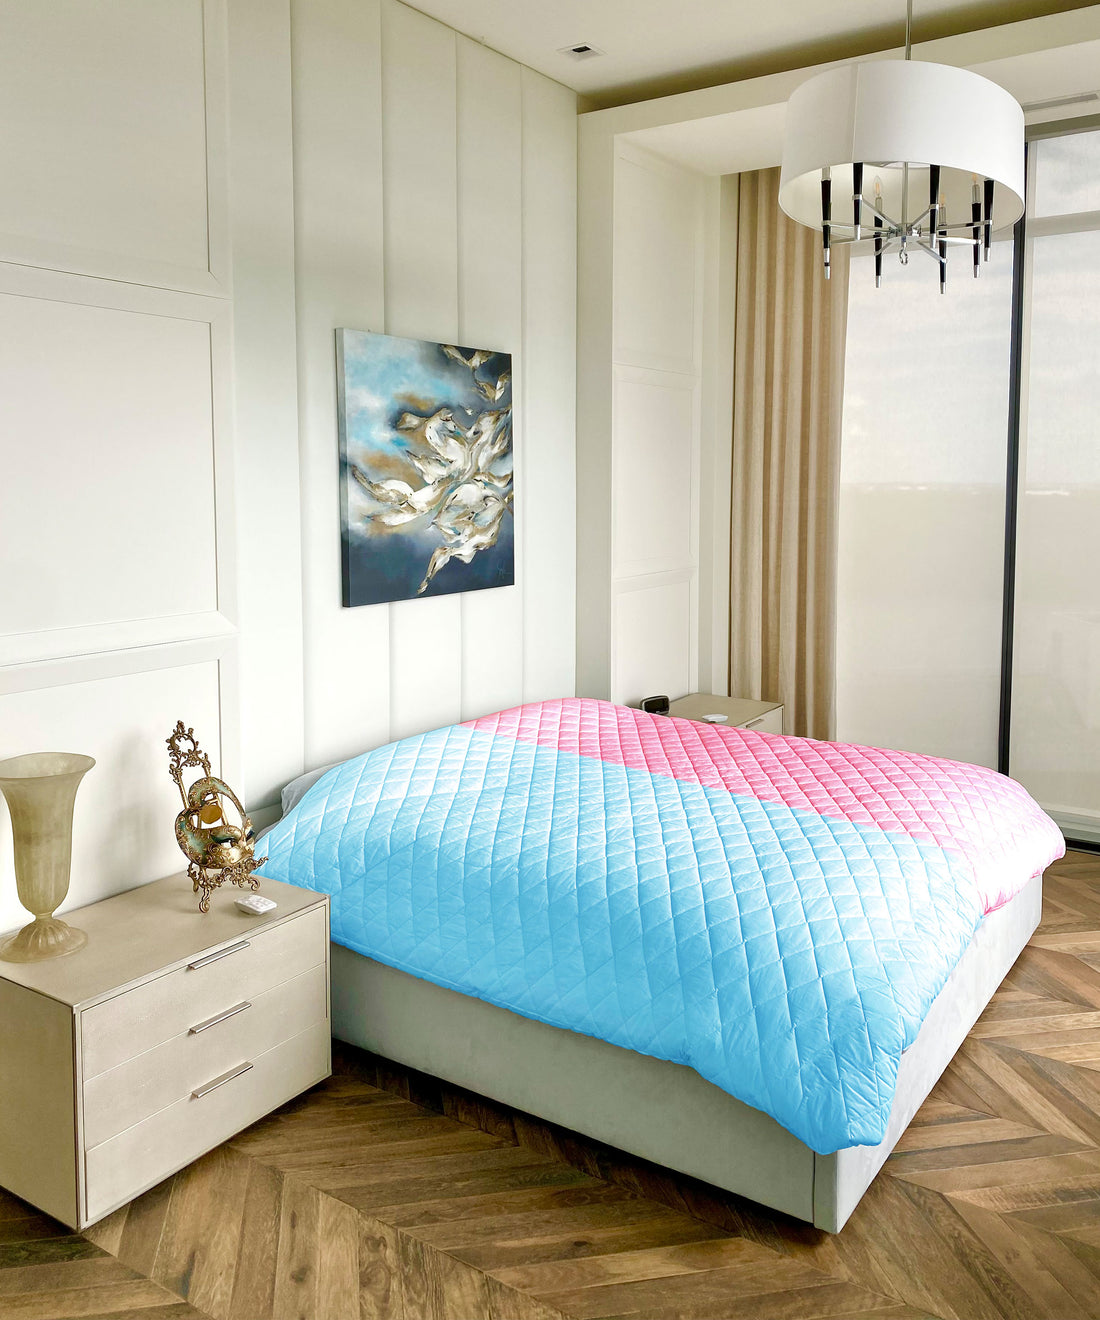 Smartduvet Version 2 (includes quilted smart layer cover)